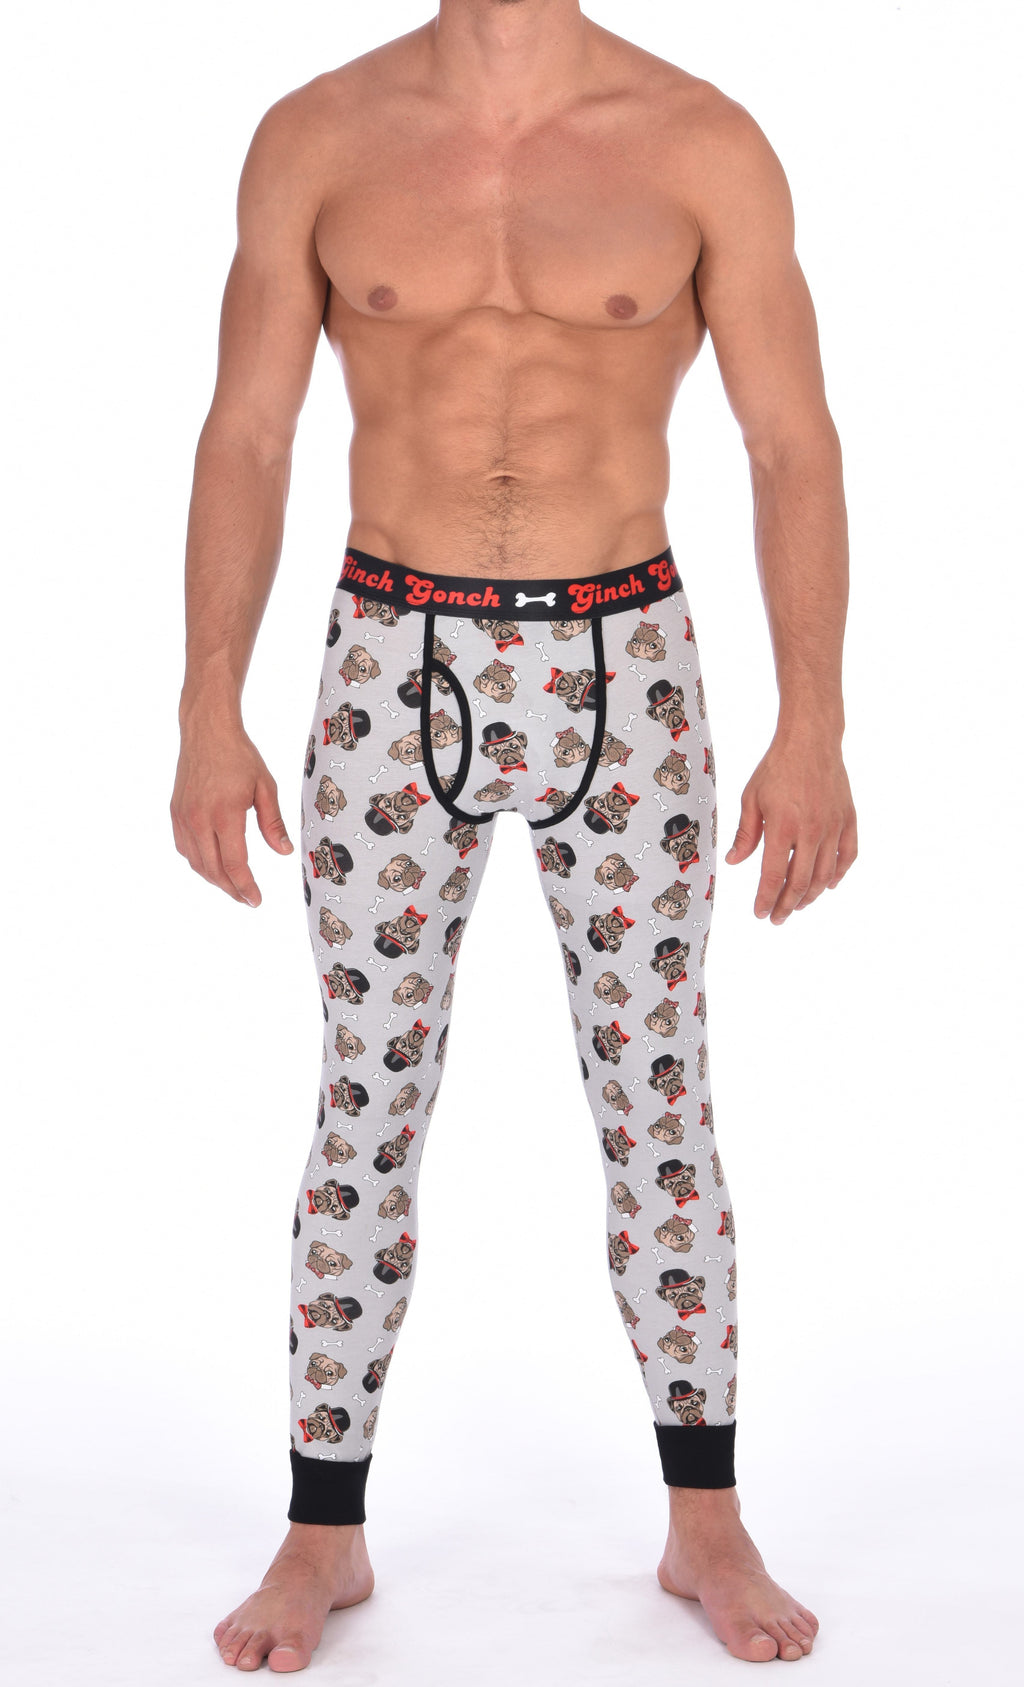 GG Ginch Gonch Pug Life leggings long johns - men's Underwear grey background with pugs with top hats and bow ties and bones. Black trim and y front with black printed waistband front. 